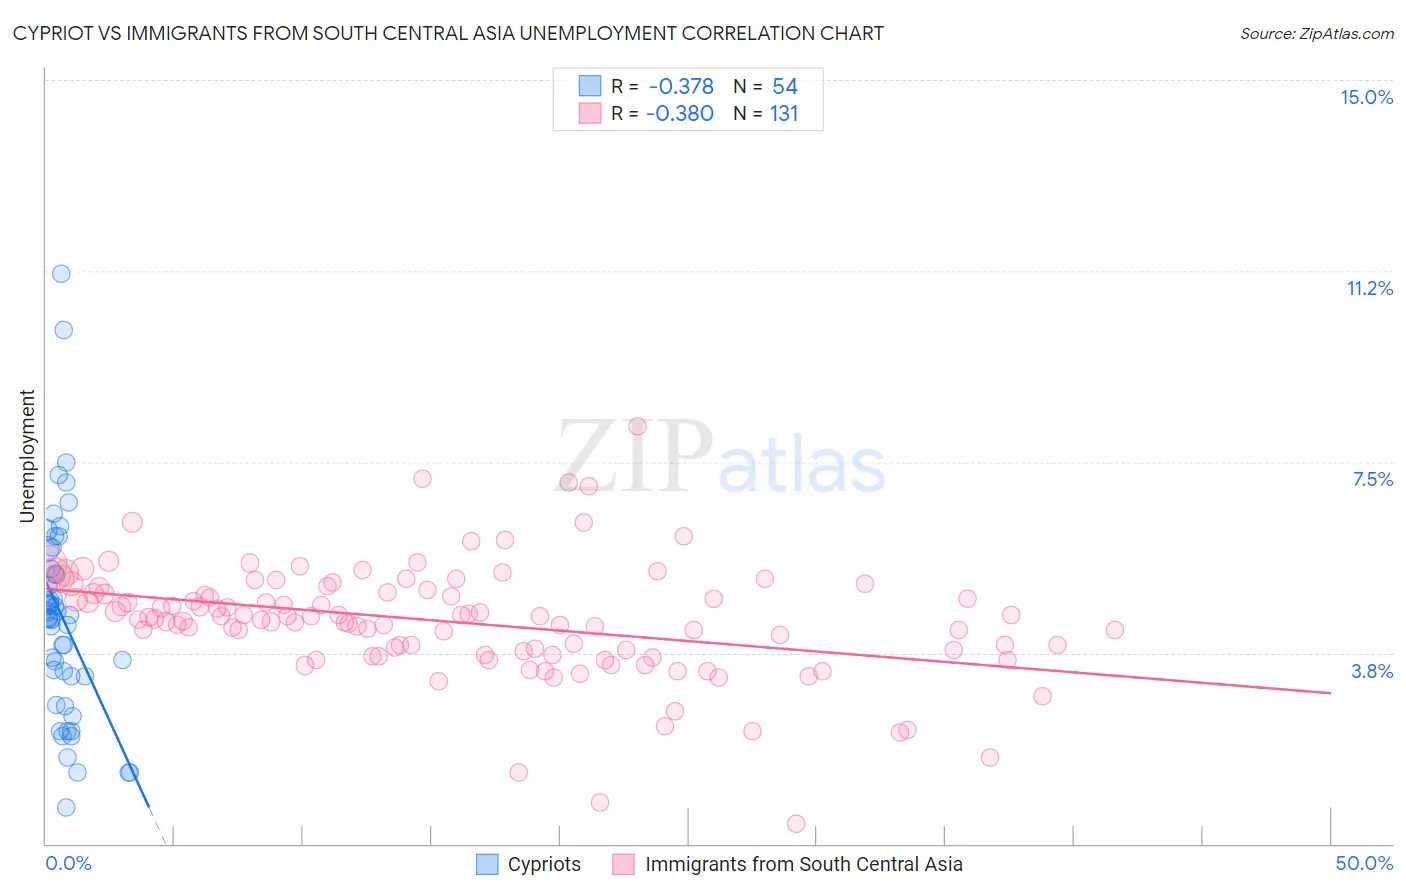 Cypriot vs Immigrants from South Central Asia Unemployment